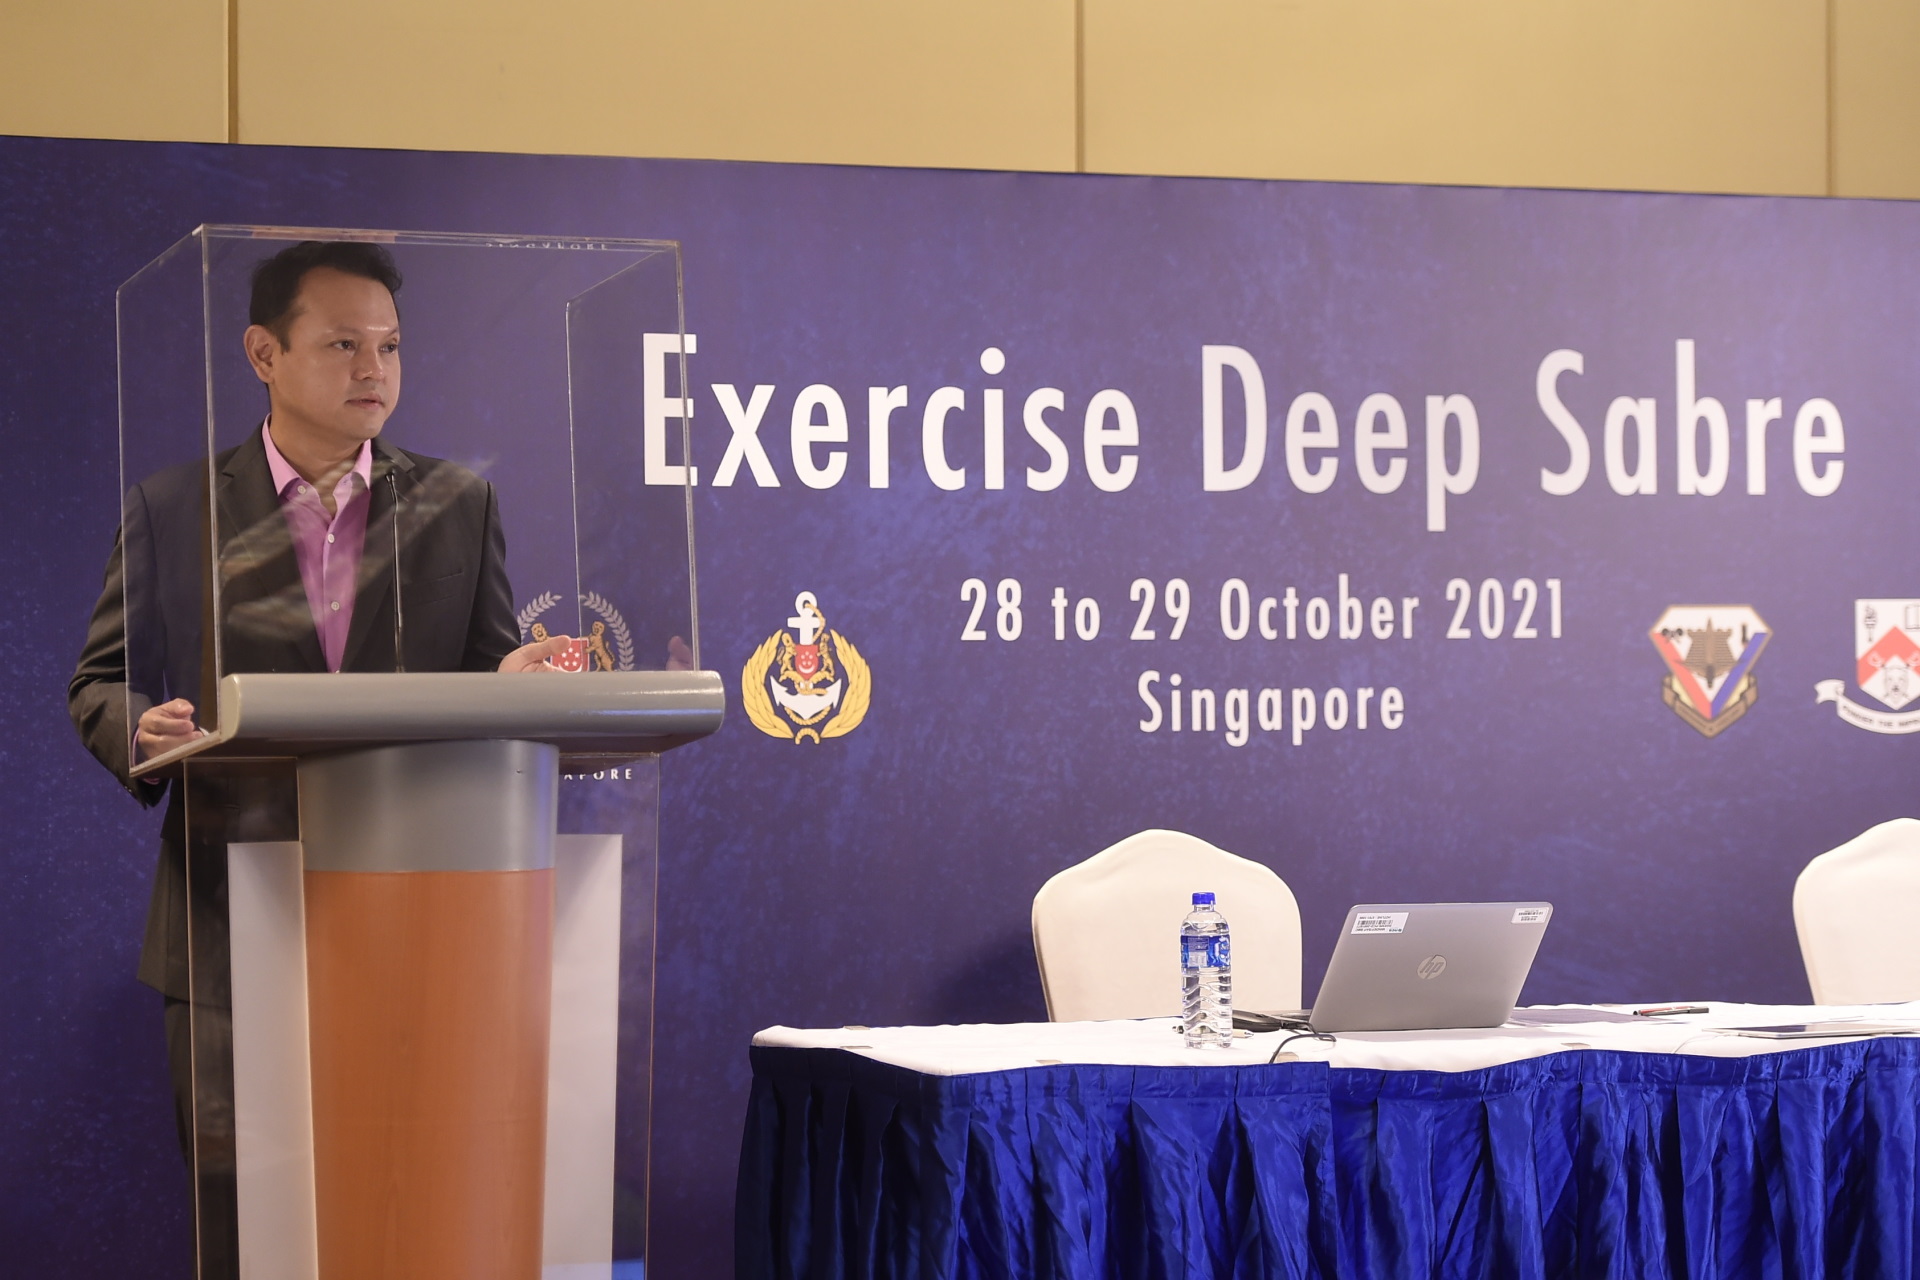 Senior Minister of State for Defence Mr Zaqy Mohamad delivering a speech at the opening ceremony of Exercise Deep Sabre 2021 (XDS21).